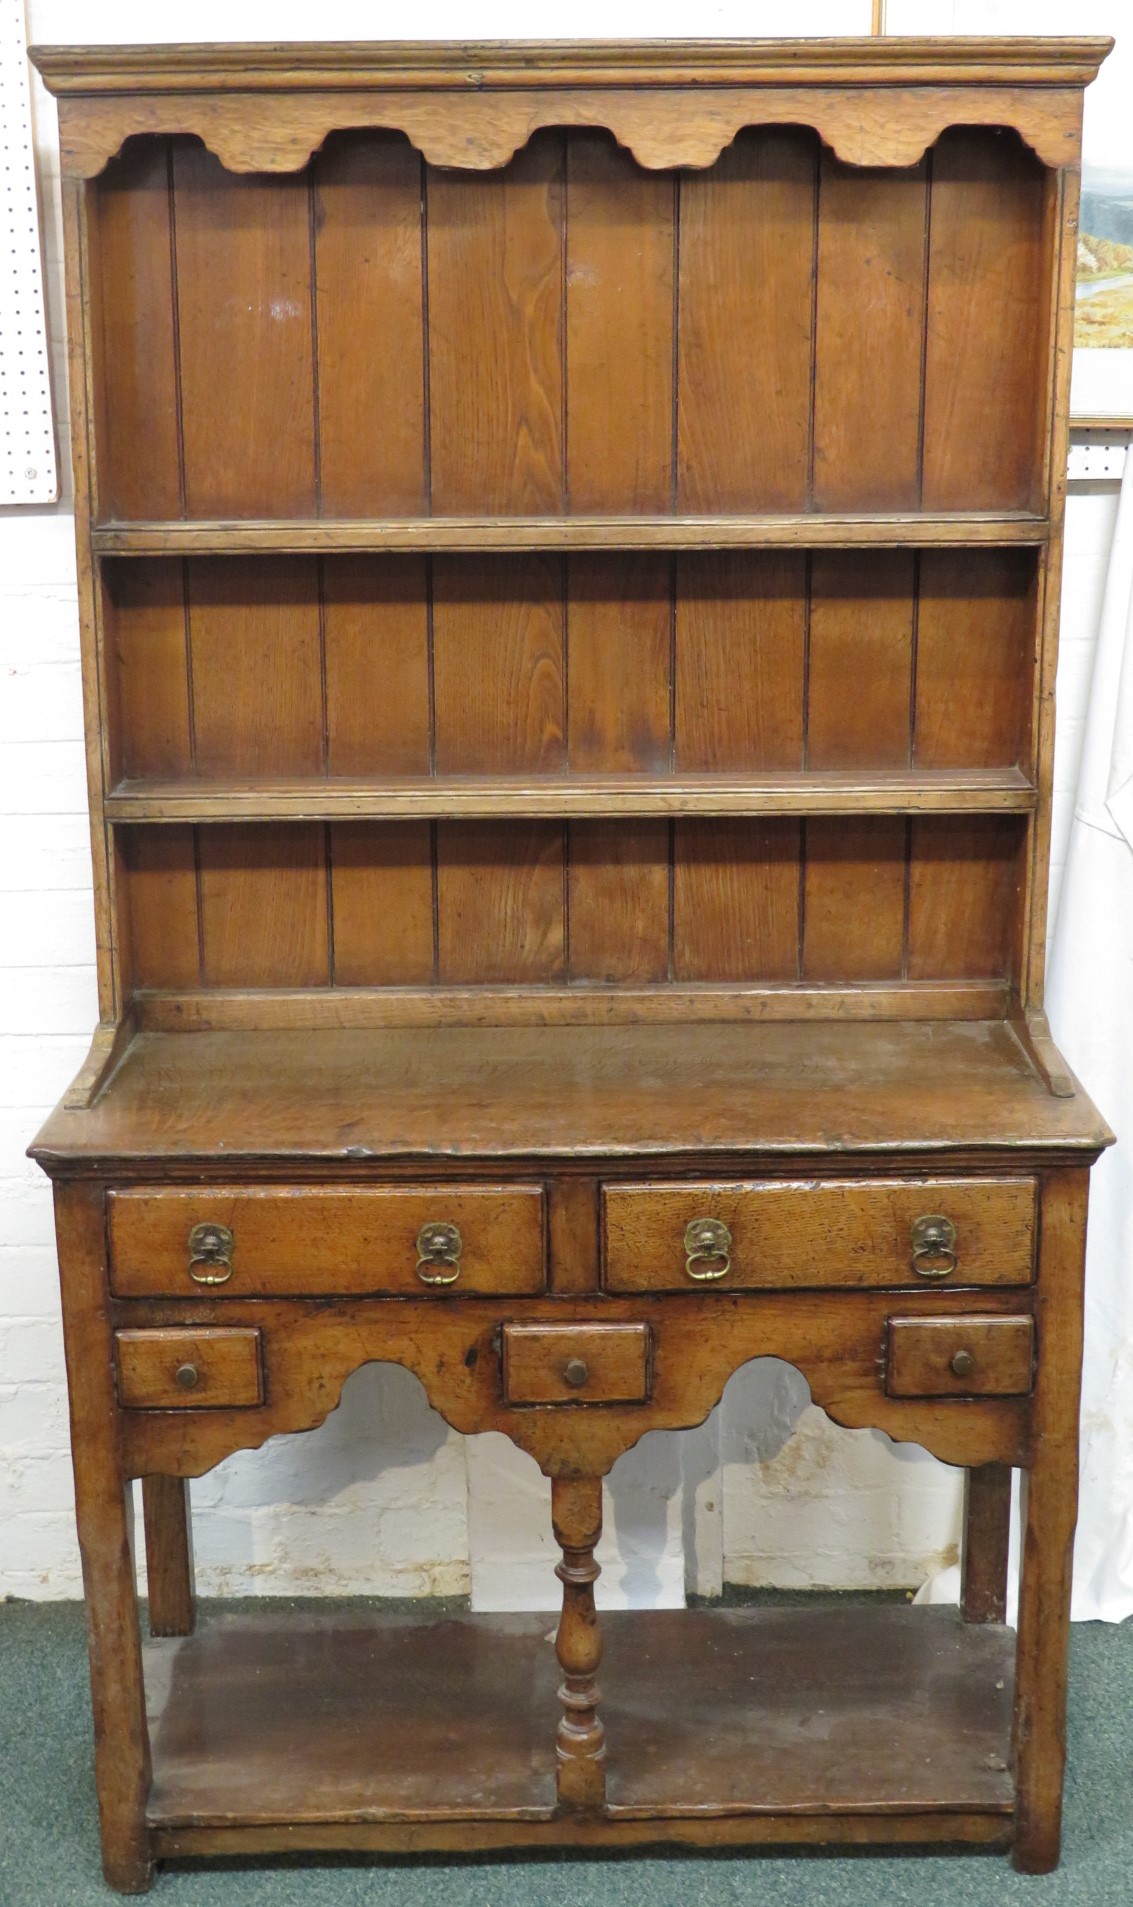 A small oak dresser (height 162cm, width 92cm, depth 37cm), the upper section with wavy